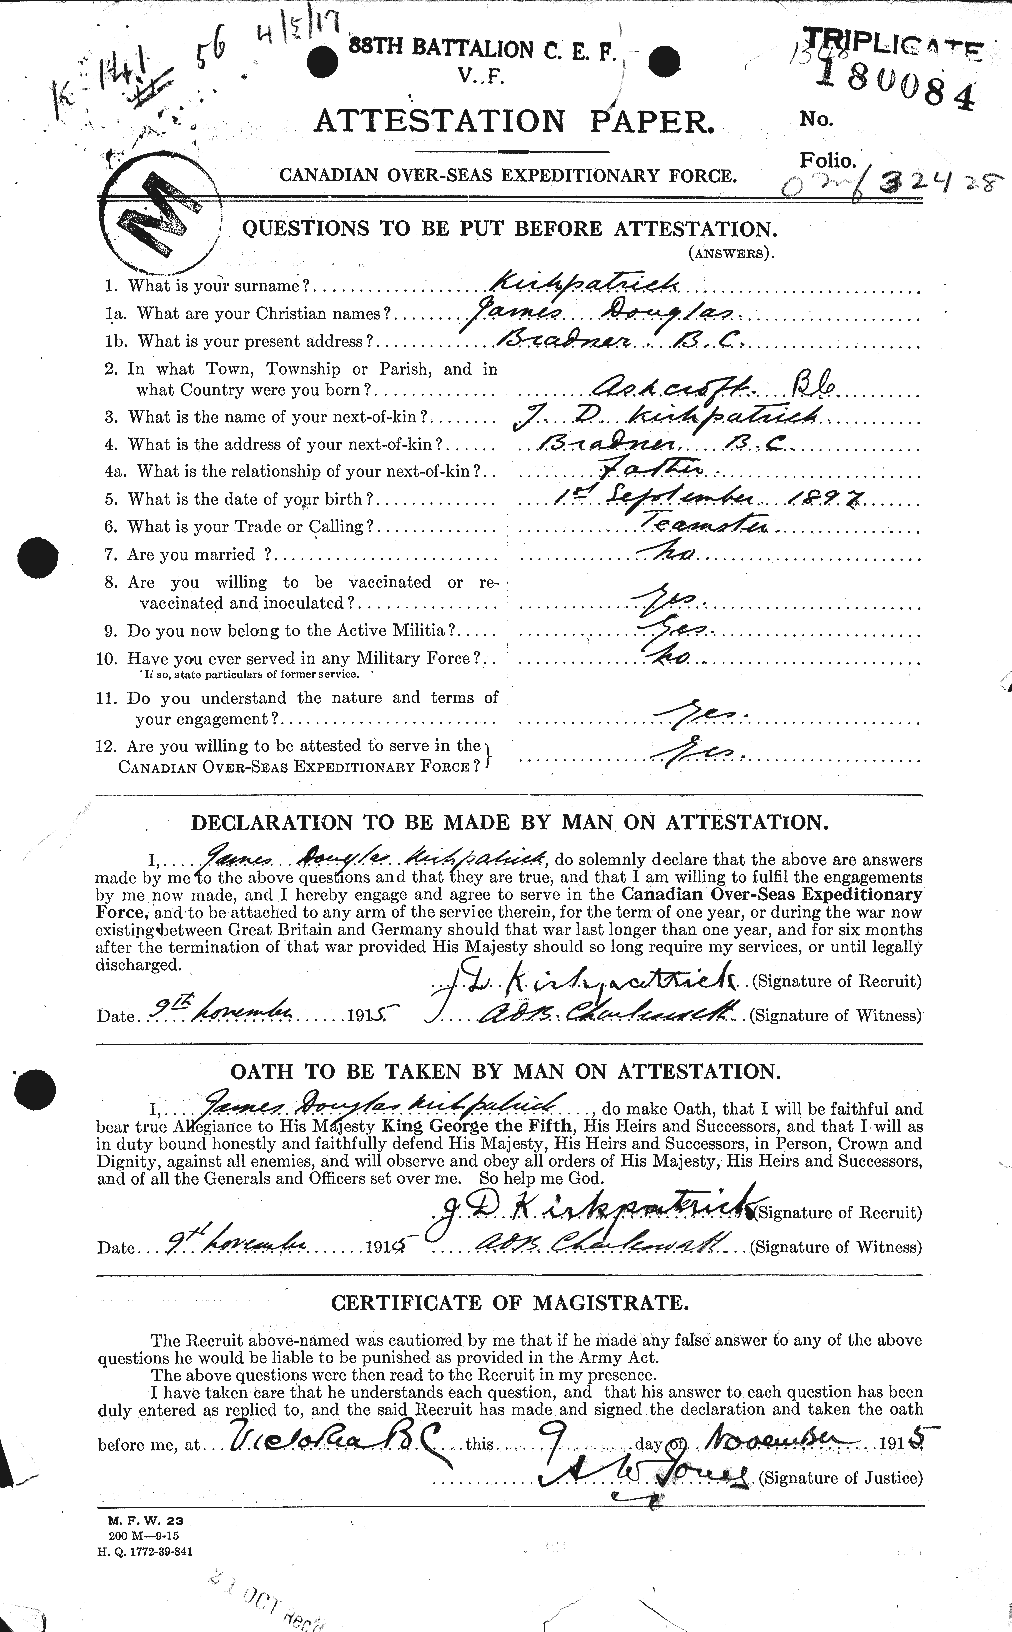 Personnel Records of the First World War - CEF 436075a